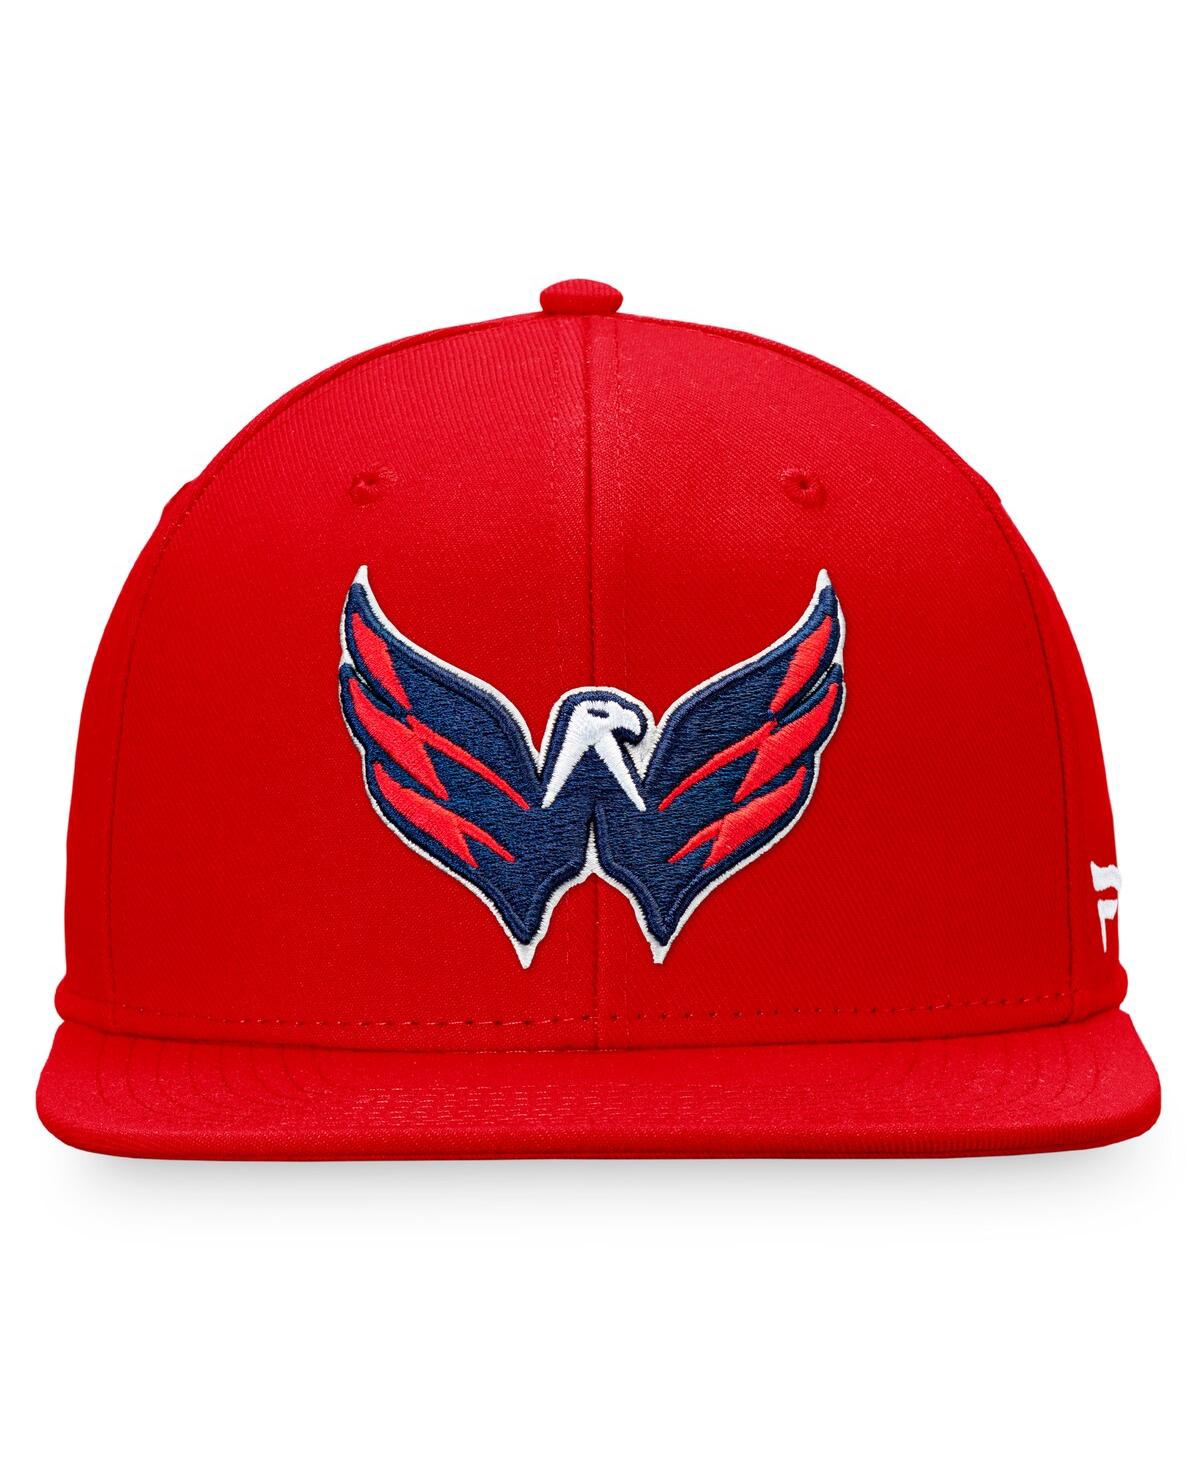 Shop Fanatics Men's  Red Washington Capitals Core Primary Logo Fitted Hat